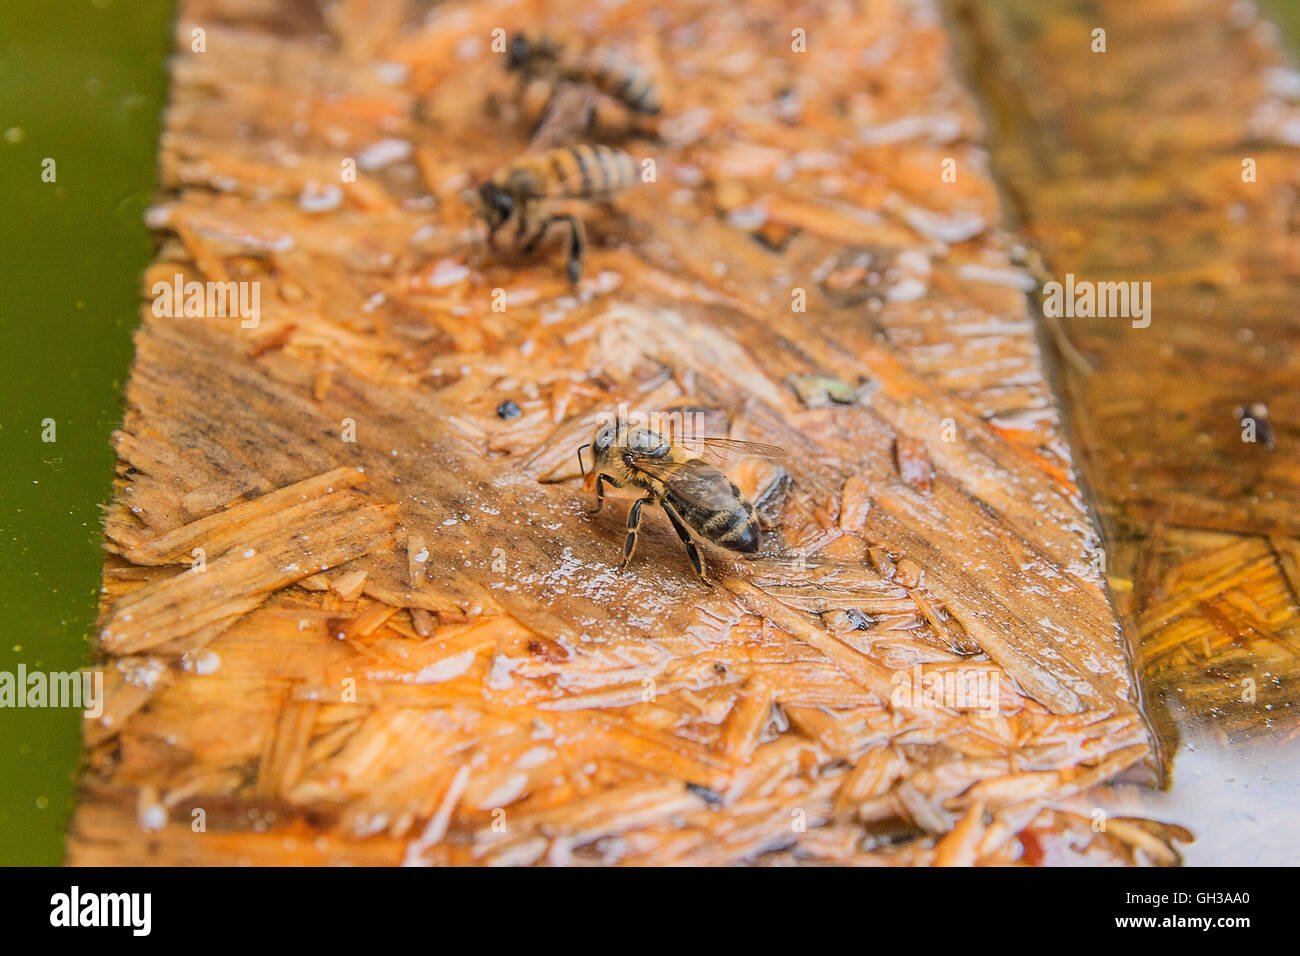 Busy bees, close up view of the working bees. Wooden plank floating on the water. Bees close up showing animals drinking water Stock Photo